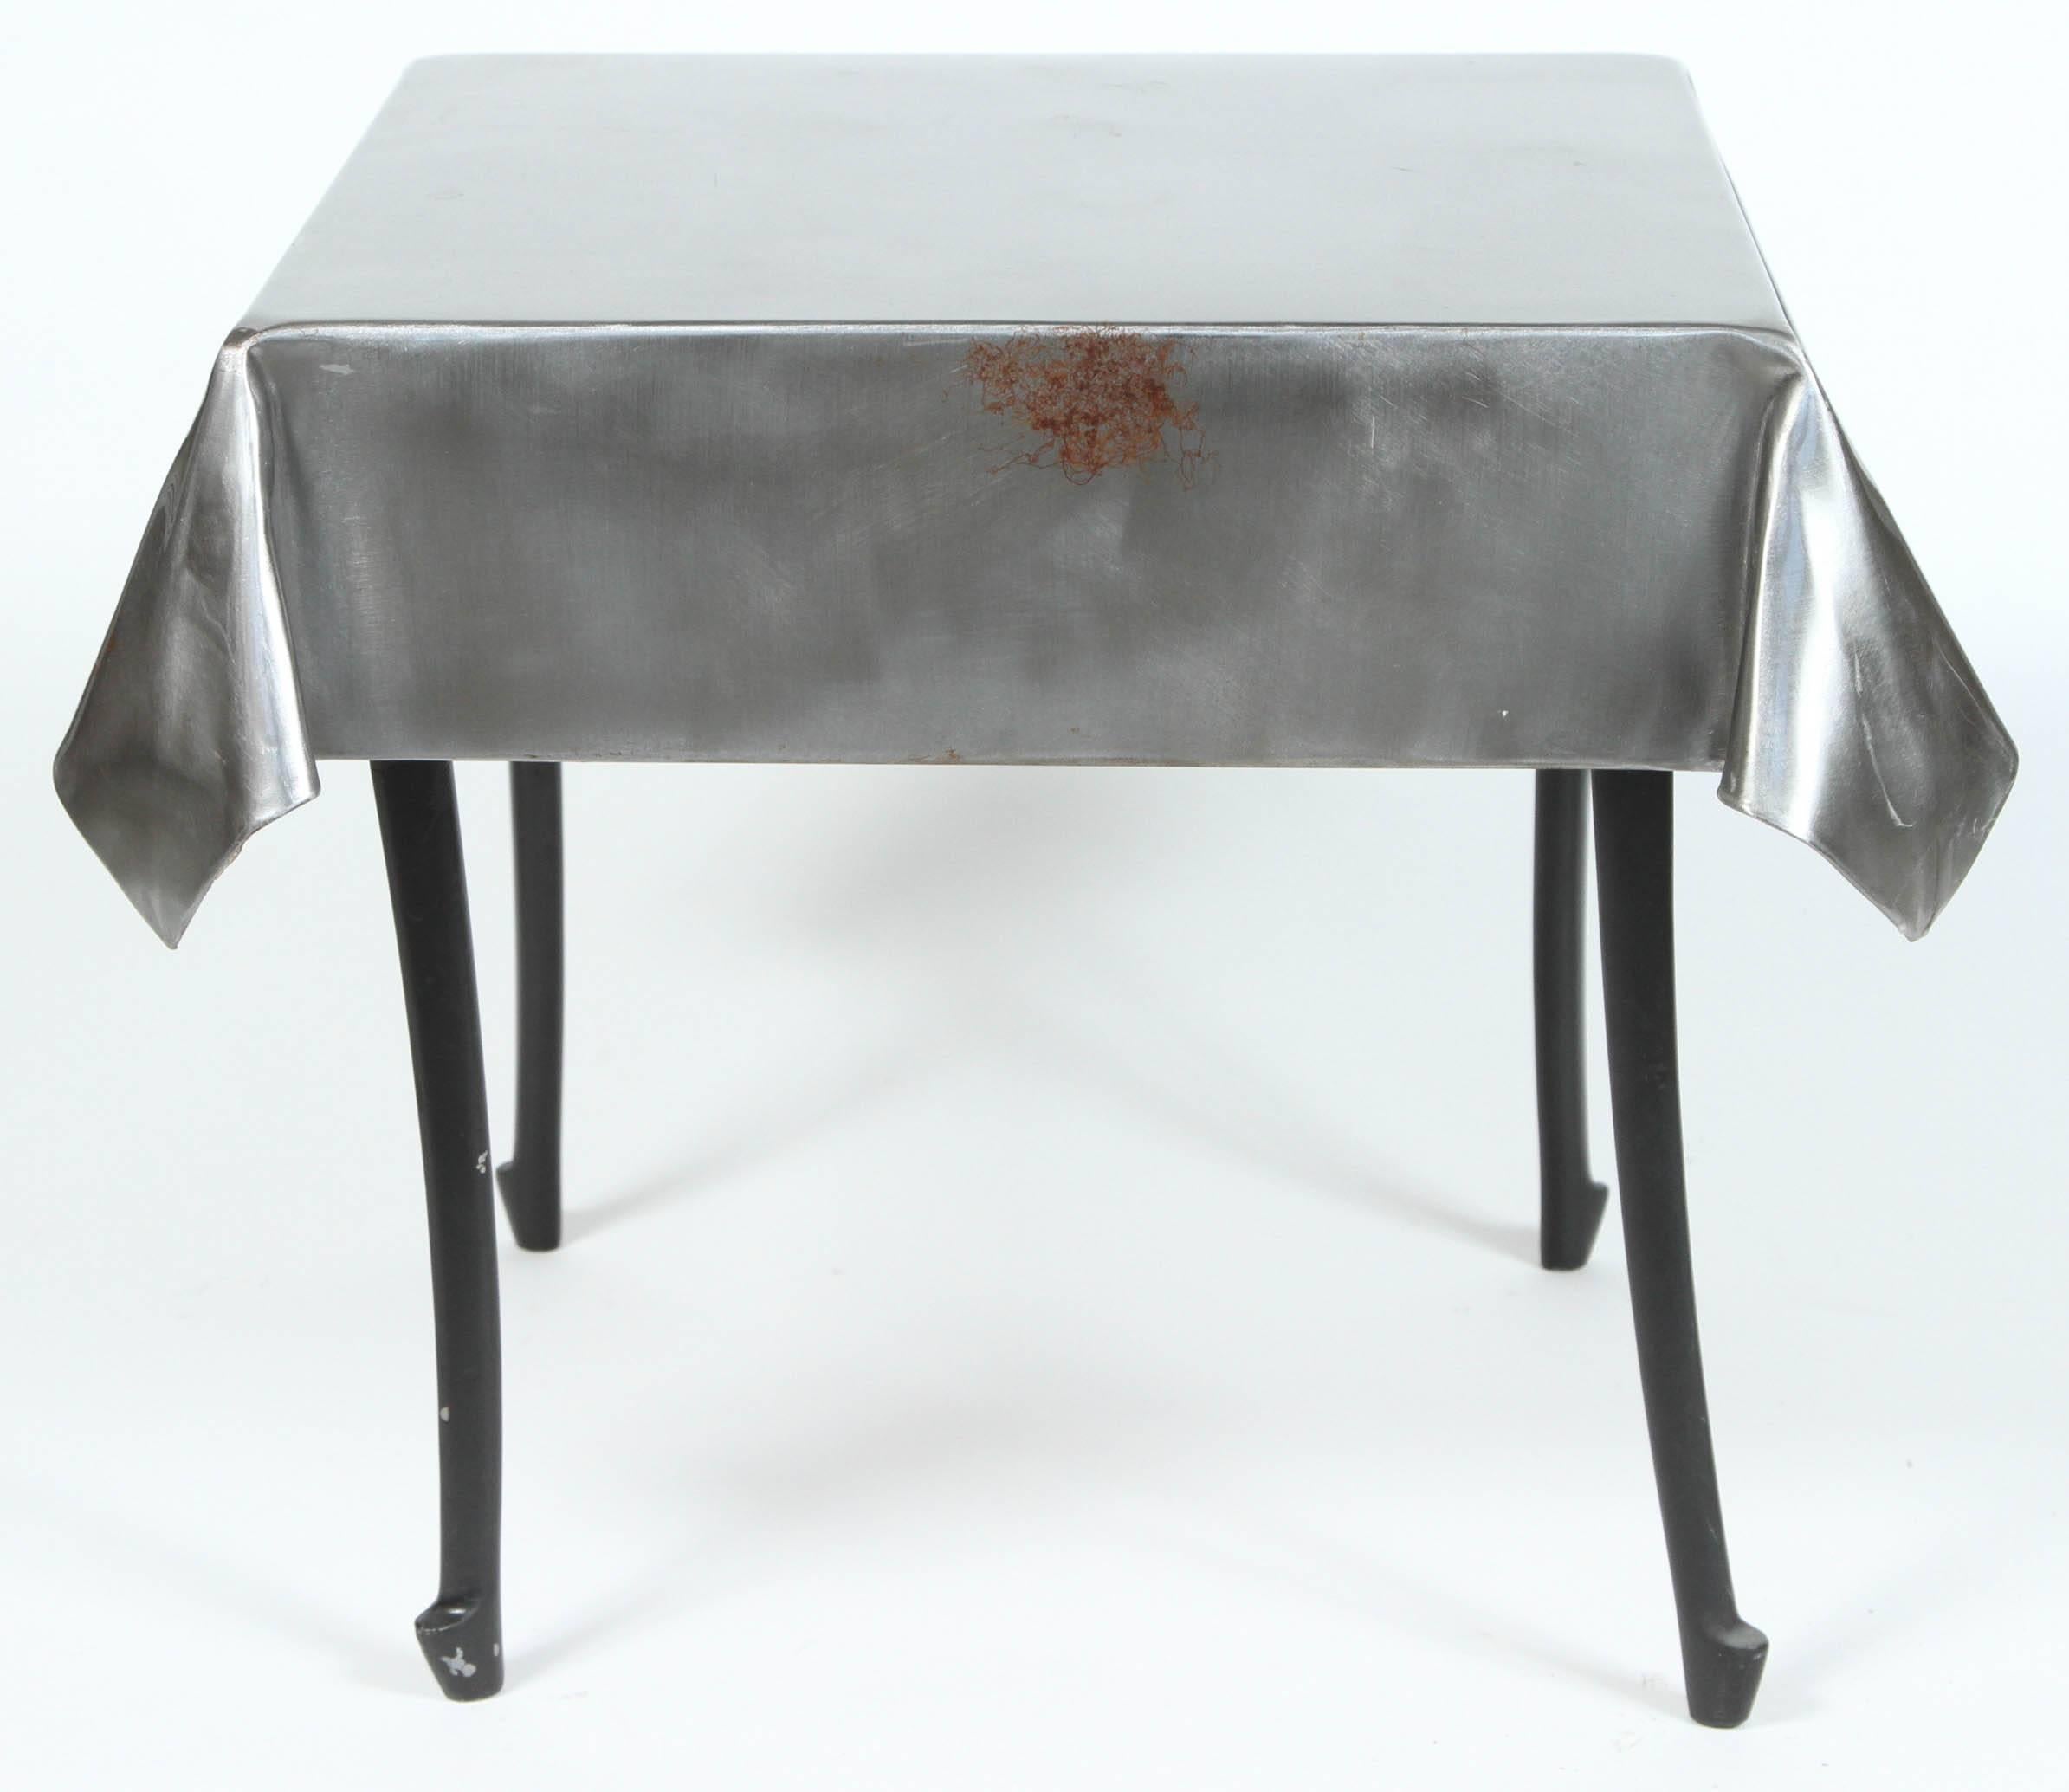 A pair of vintage steel end tables with “skirts” and cabriole legs.